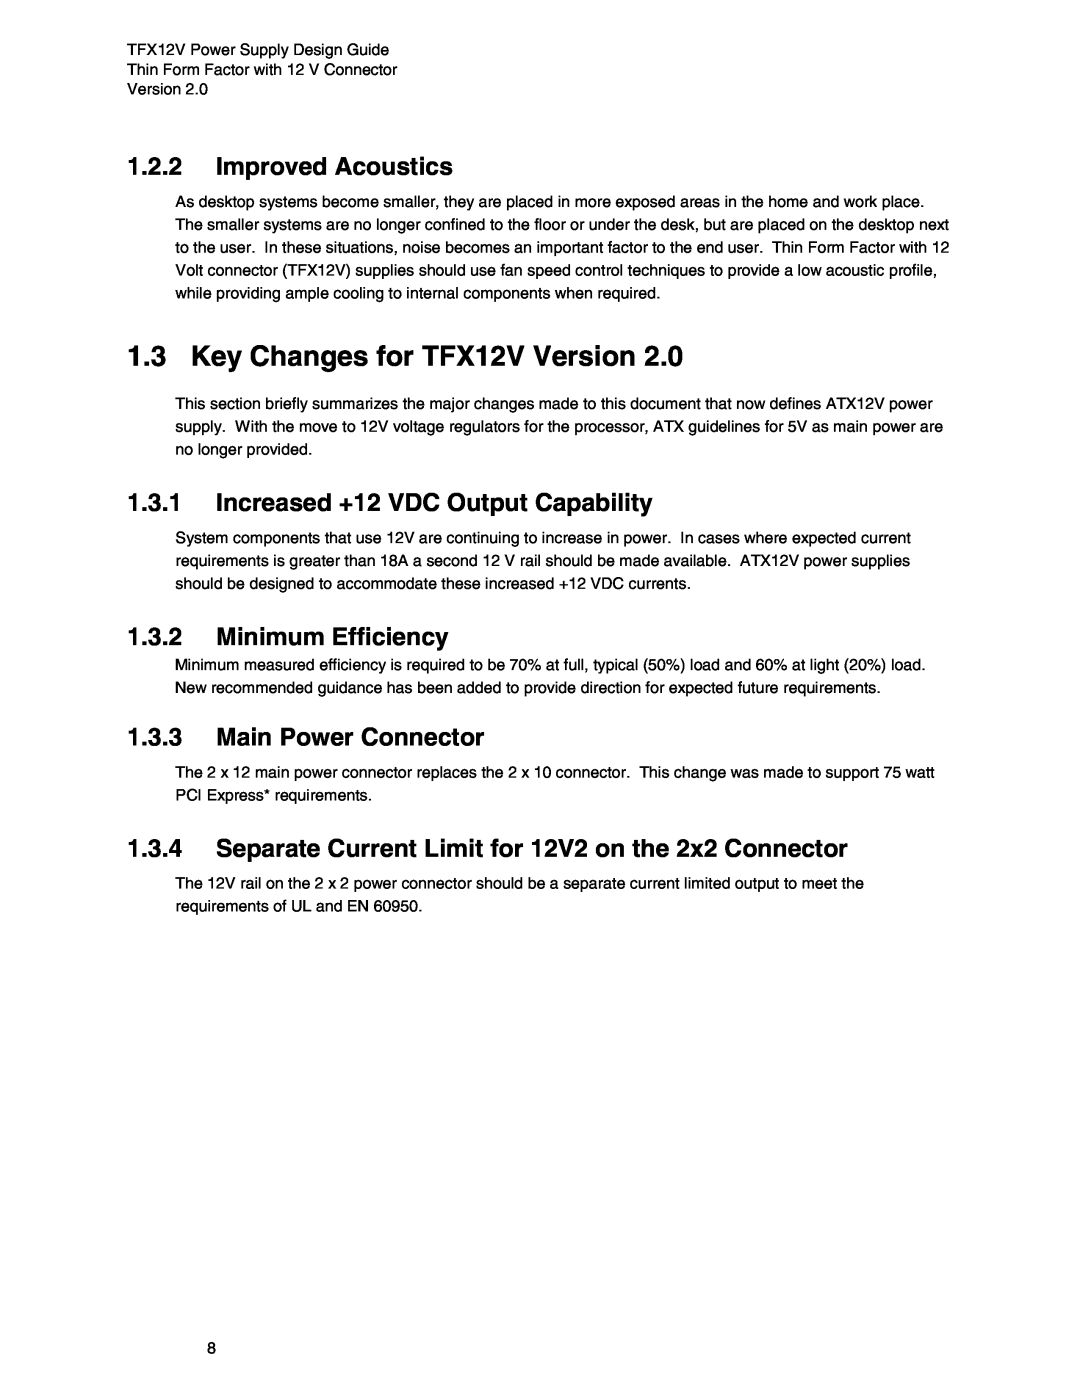 Intel manual Key Changes for TFX12V Version, Improved Acoustics, Increased +12 VDC Output Capability, Minimum Efficiency 